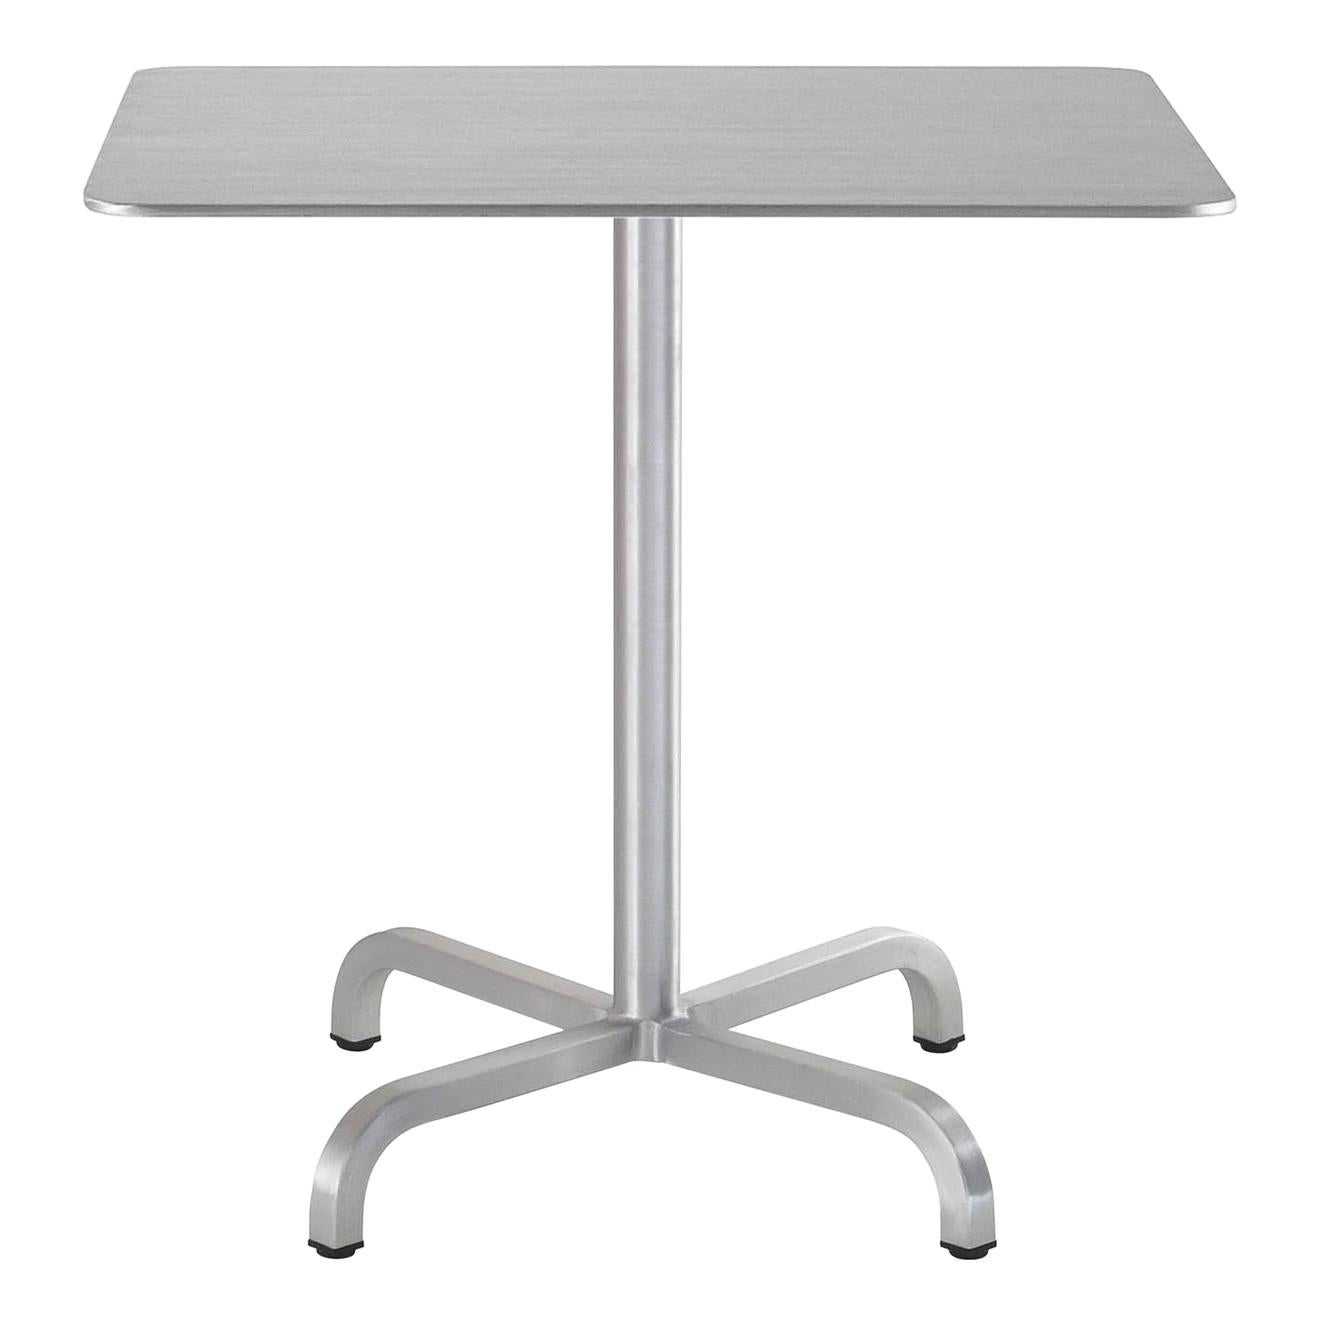 Emeco 20-06 Medium Square Café Table in Brushed Aluminum by Norman Foster  For Sale